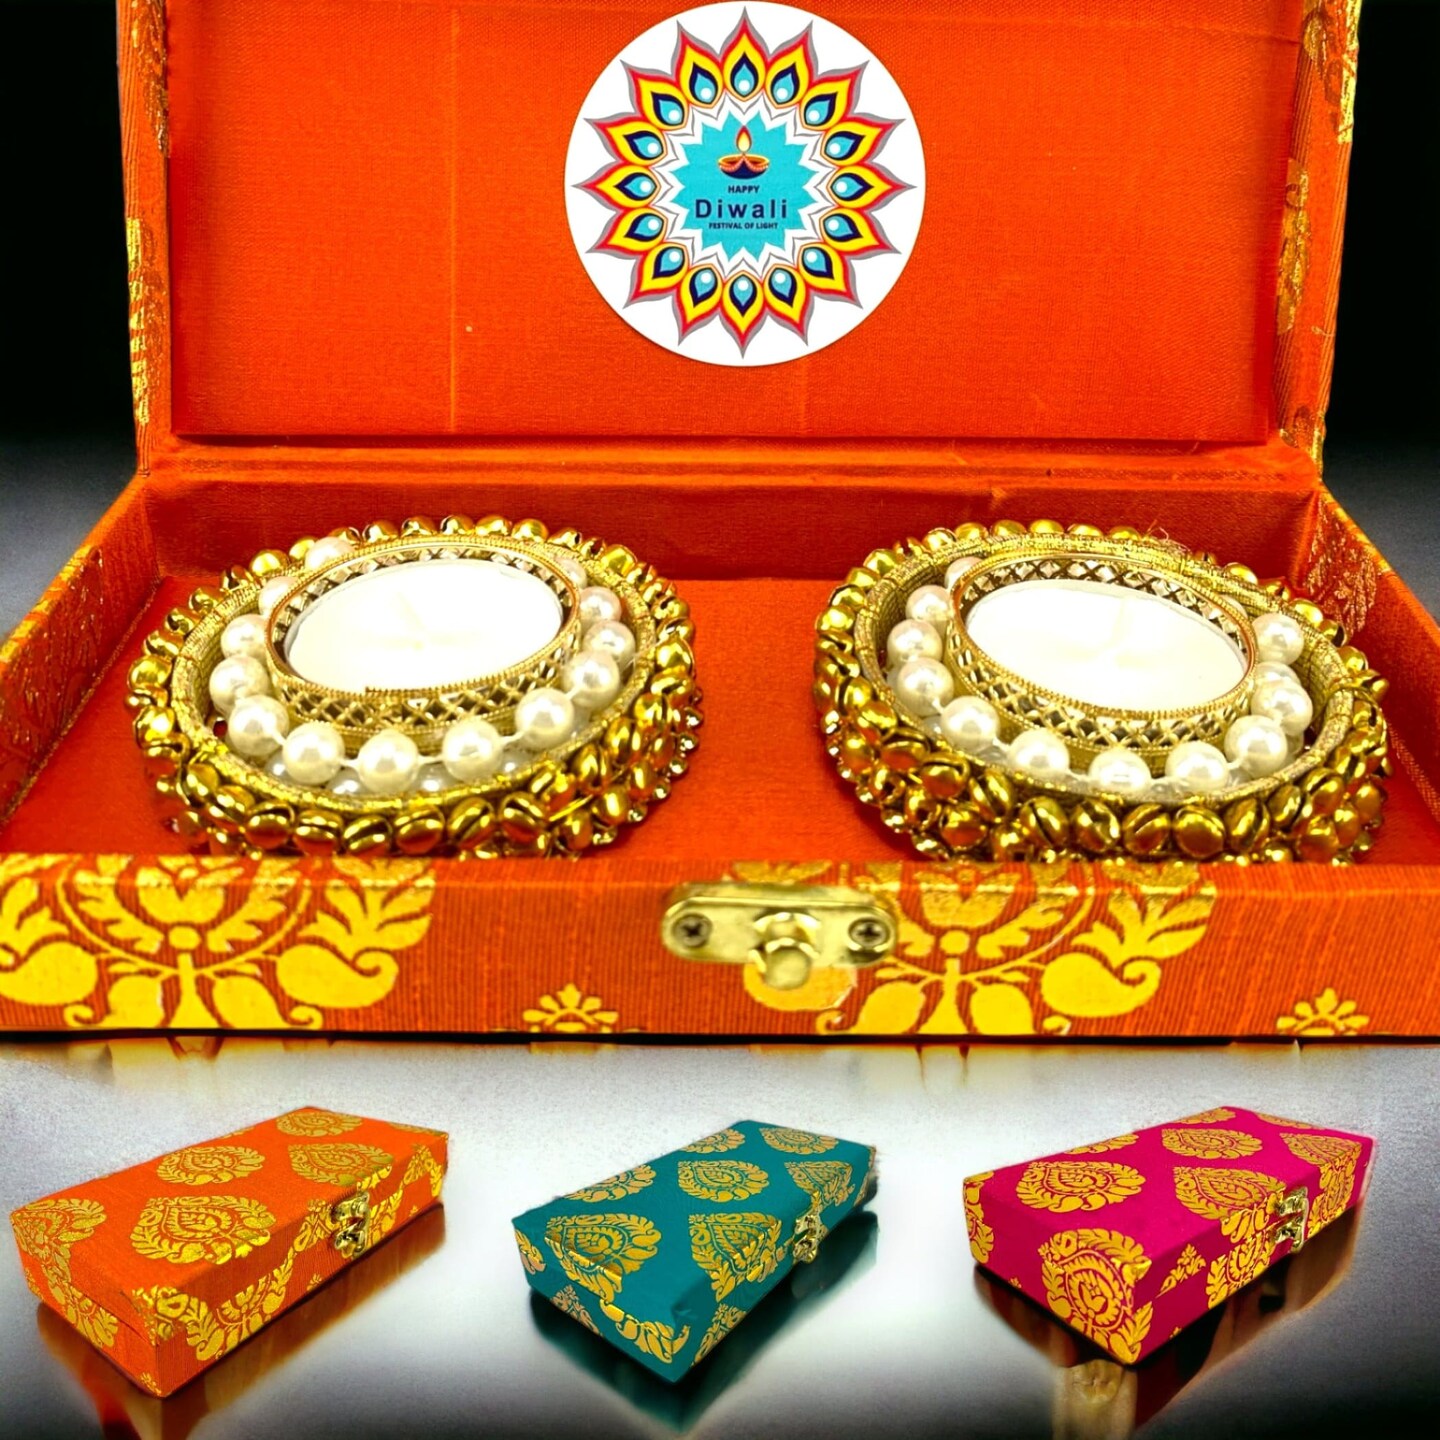 Diwali Gifts for your Family | Unique Personalised GIfts for each member